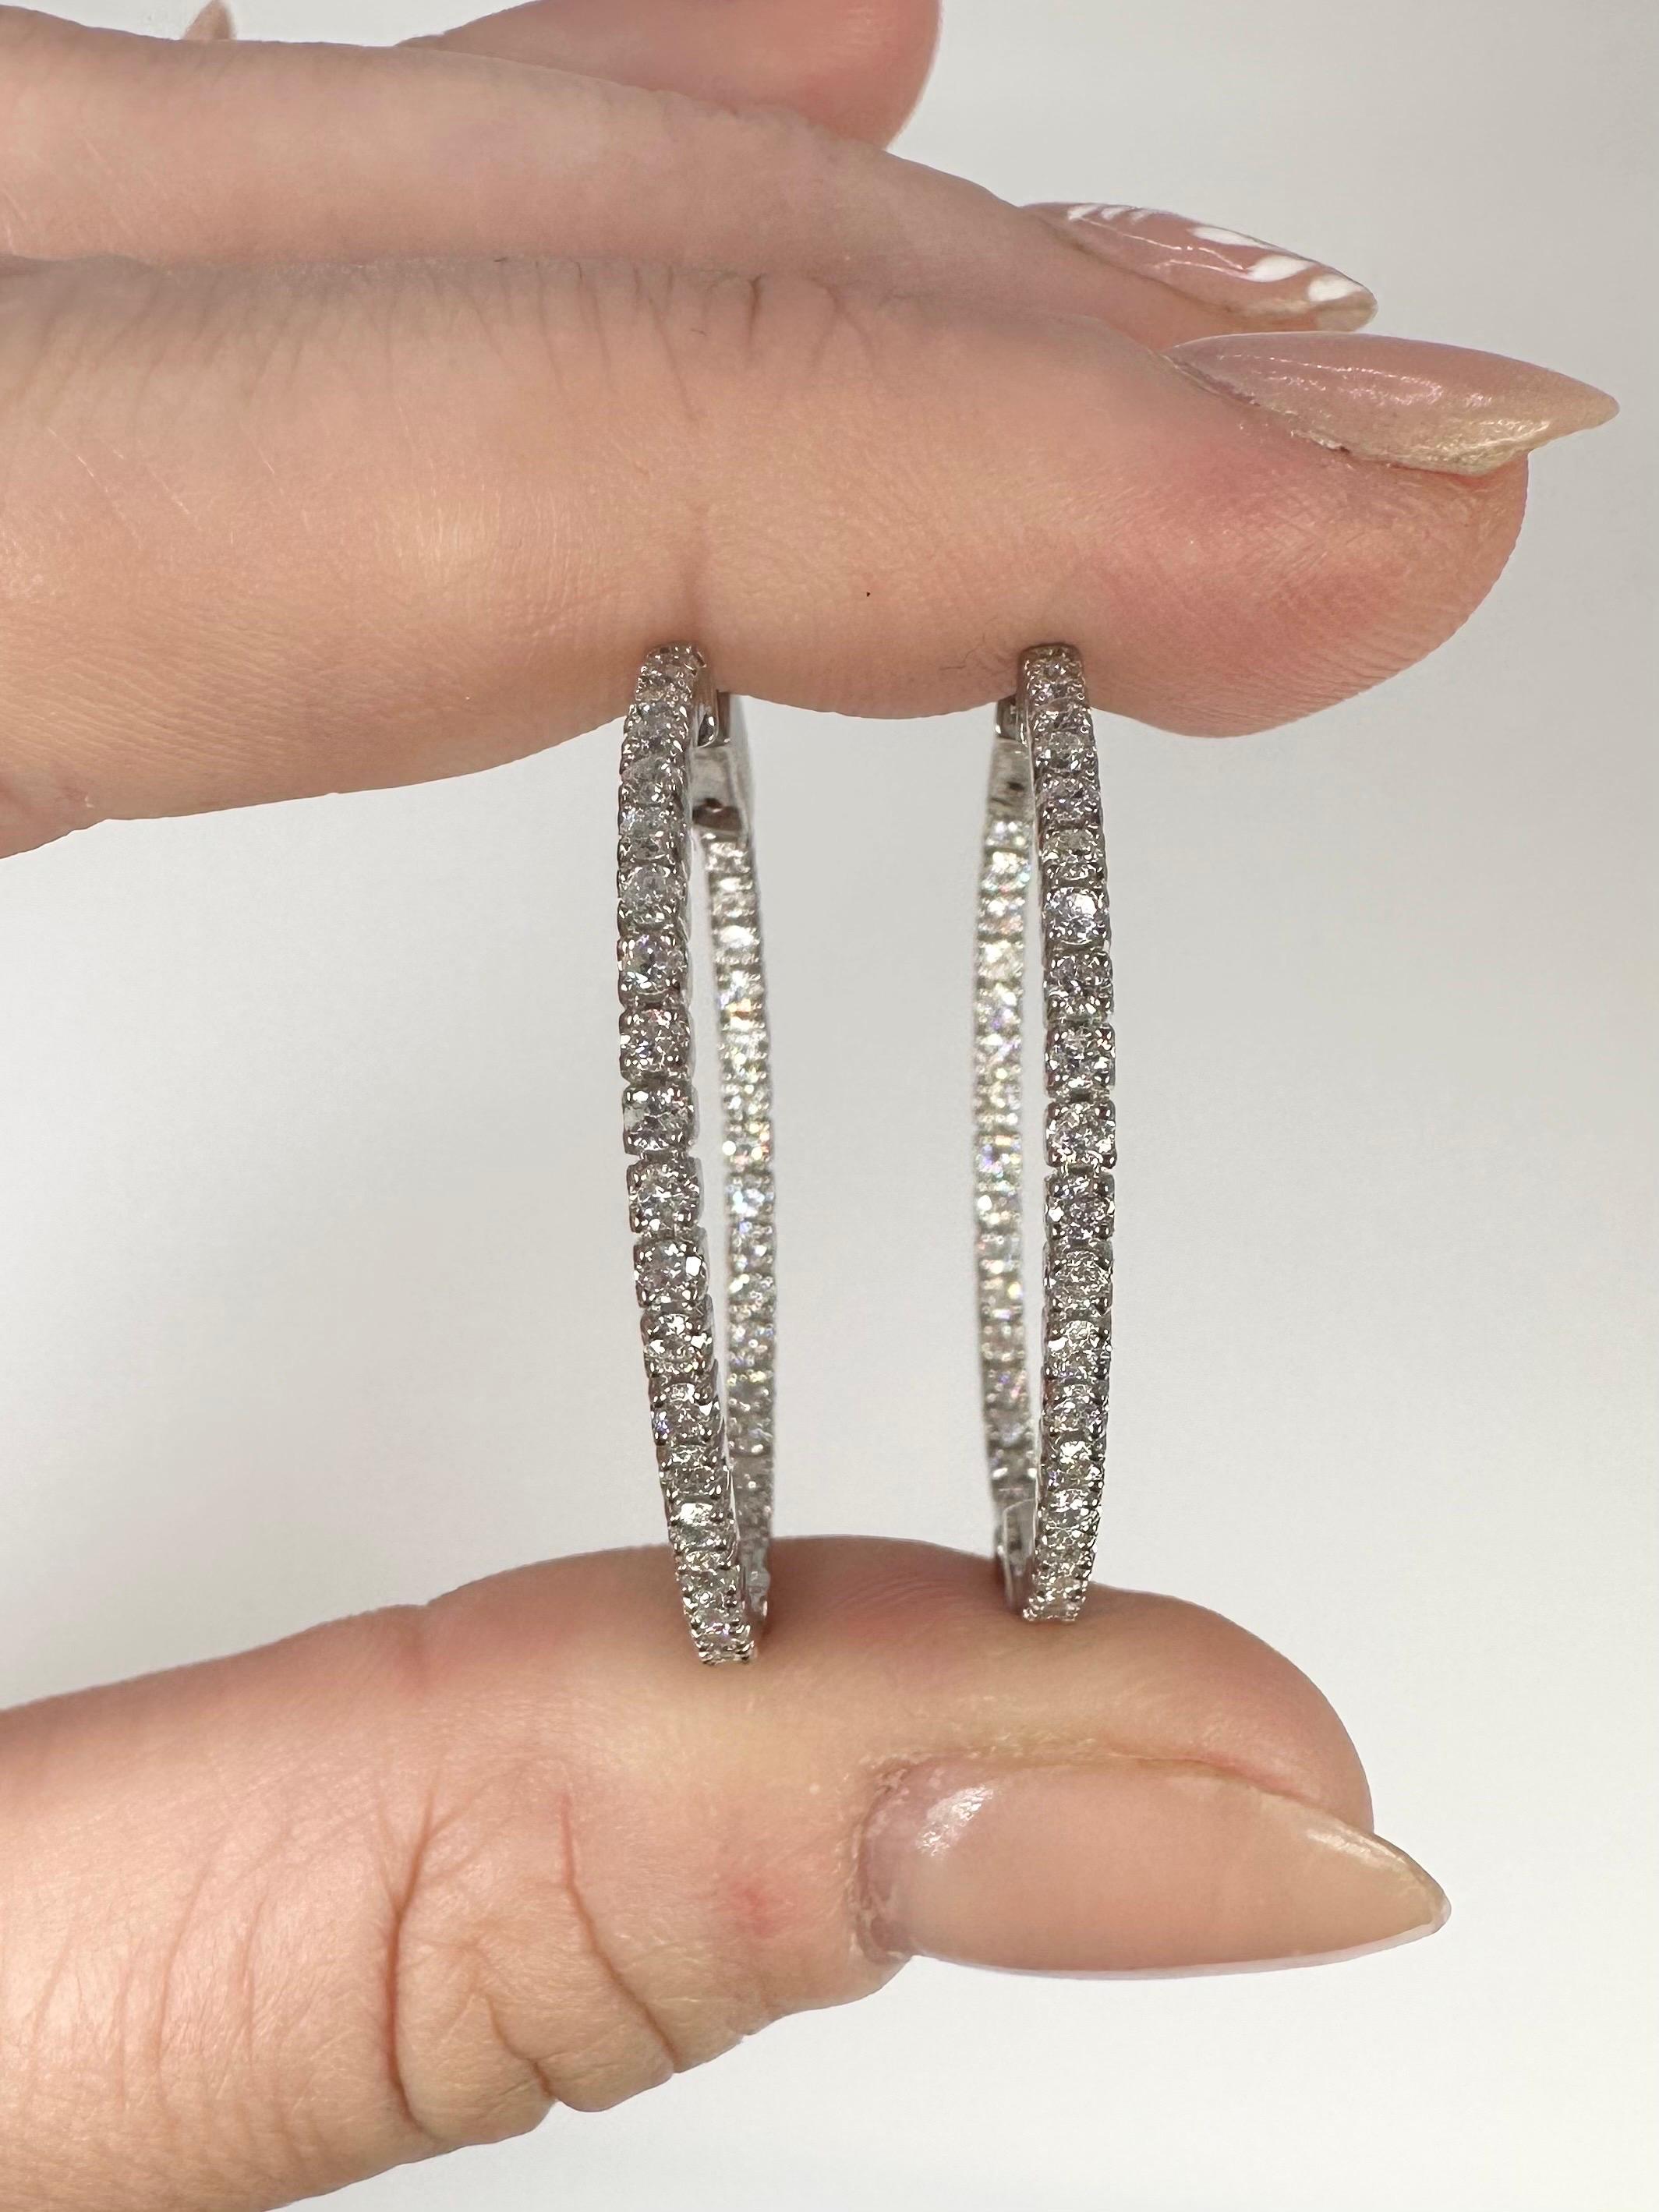 Sparkling diamond hoops made in 14KT white gold, the trendy inside out dsign is stunning when on ear!

GOLD: 14KT gold
NATURAL DIAMOND(S)
Clarity/Color: VS-SI/G-H
Carat:1.96ct
Cut:Round Brilliant
Grams:6.20
Item#: 150-00076MREK

WHAT YOU GET AT